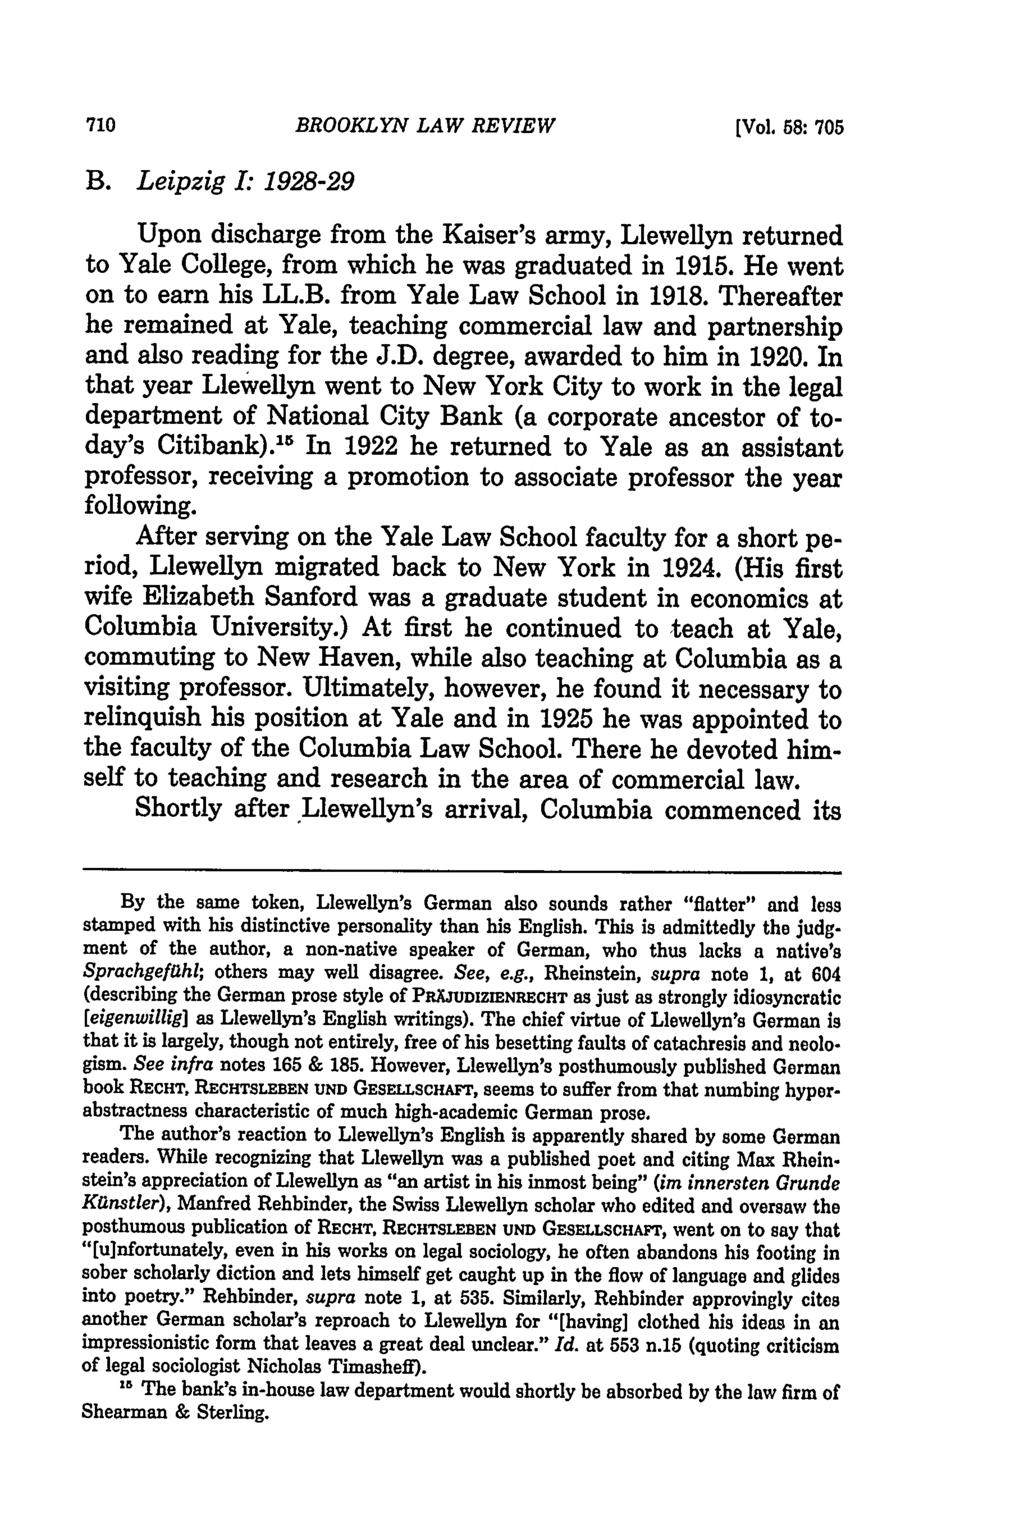 BROOKLYN LAW REVIEW [Vol. 58: 705 B. Leipzig I: 1928-29 Upon discharge from the Kaiser's army, Llewellyn returned to Yale College, from which he was graduated in 1915. He went on to earn his LL.B. from Yale Law School in 1918.